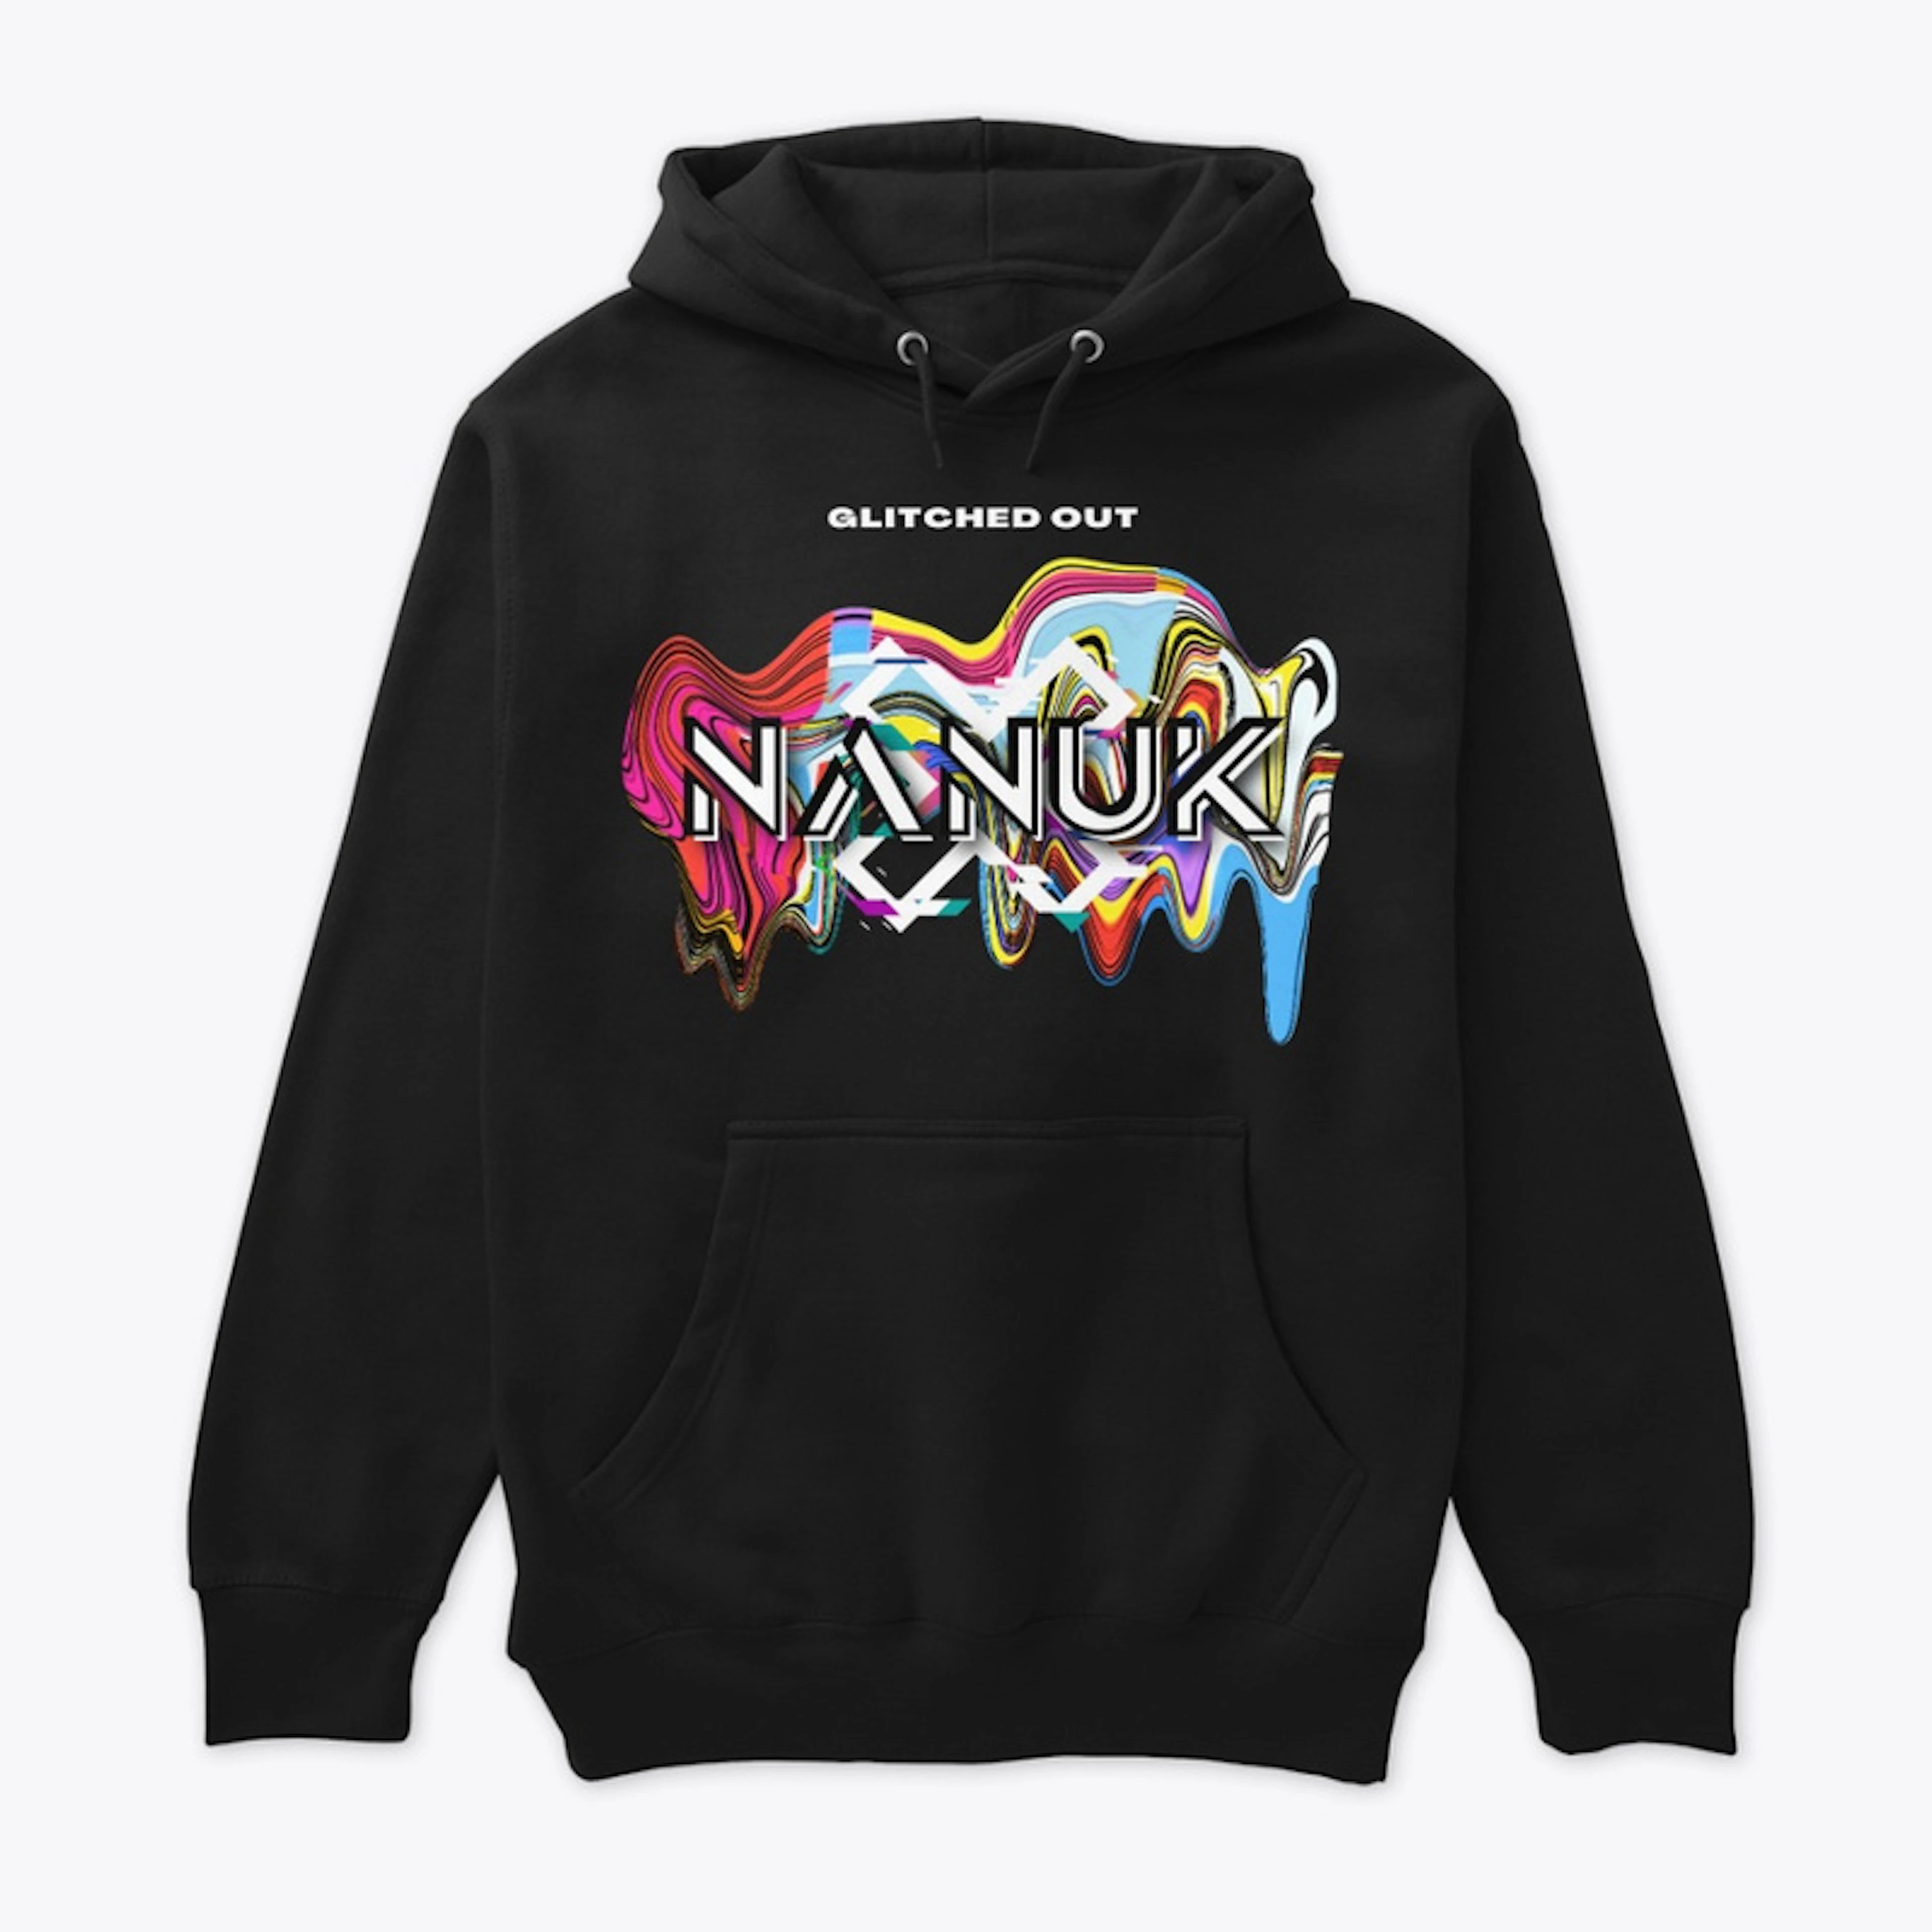 Glitched Out Hoodie